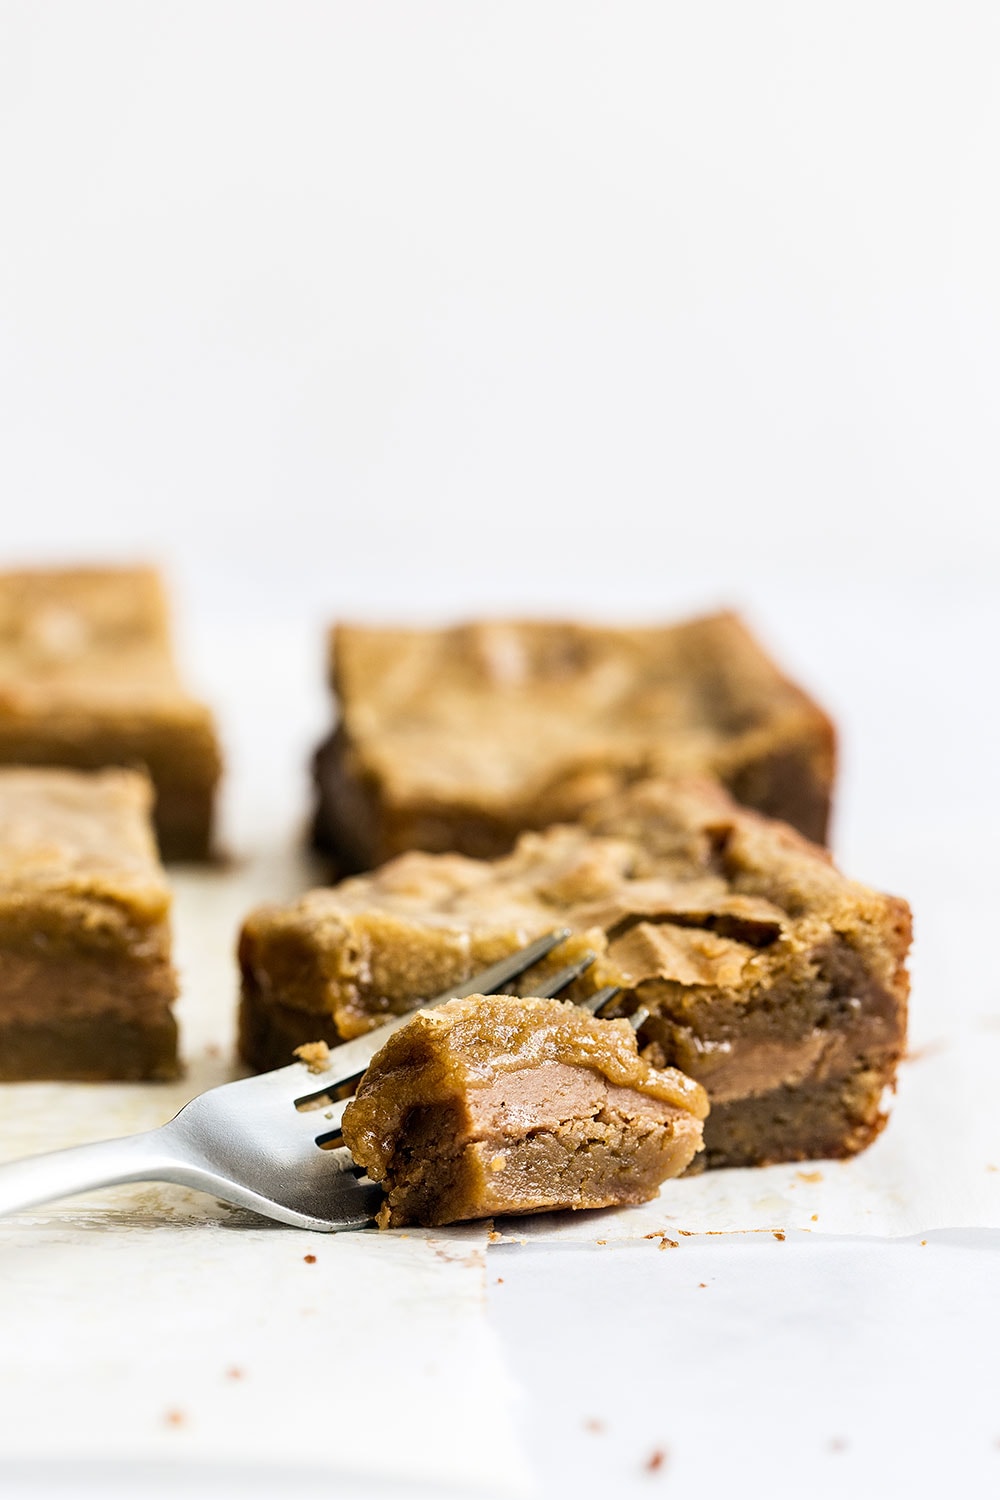 Biscoff cookie butter blondie recipe made with brown sugar and filled with flavor!